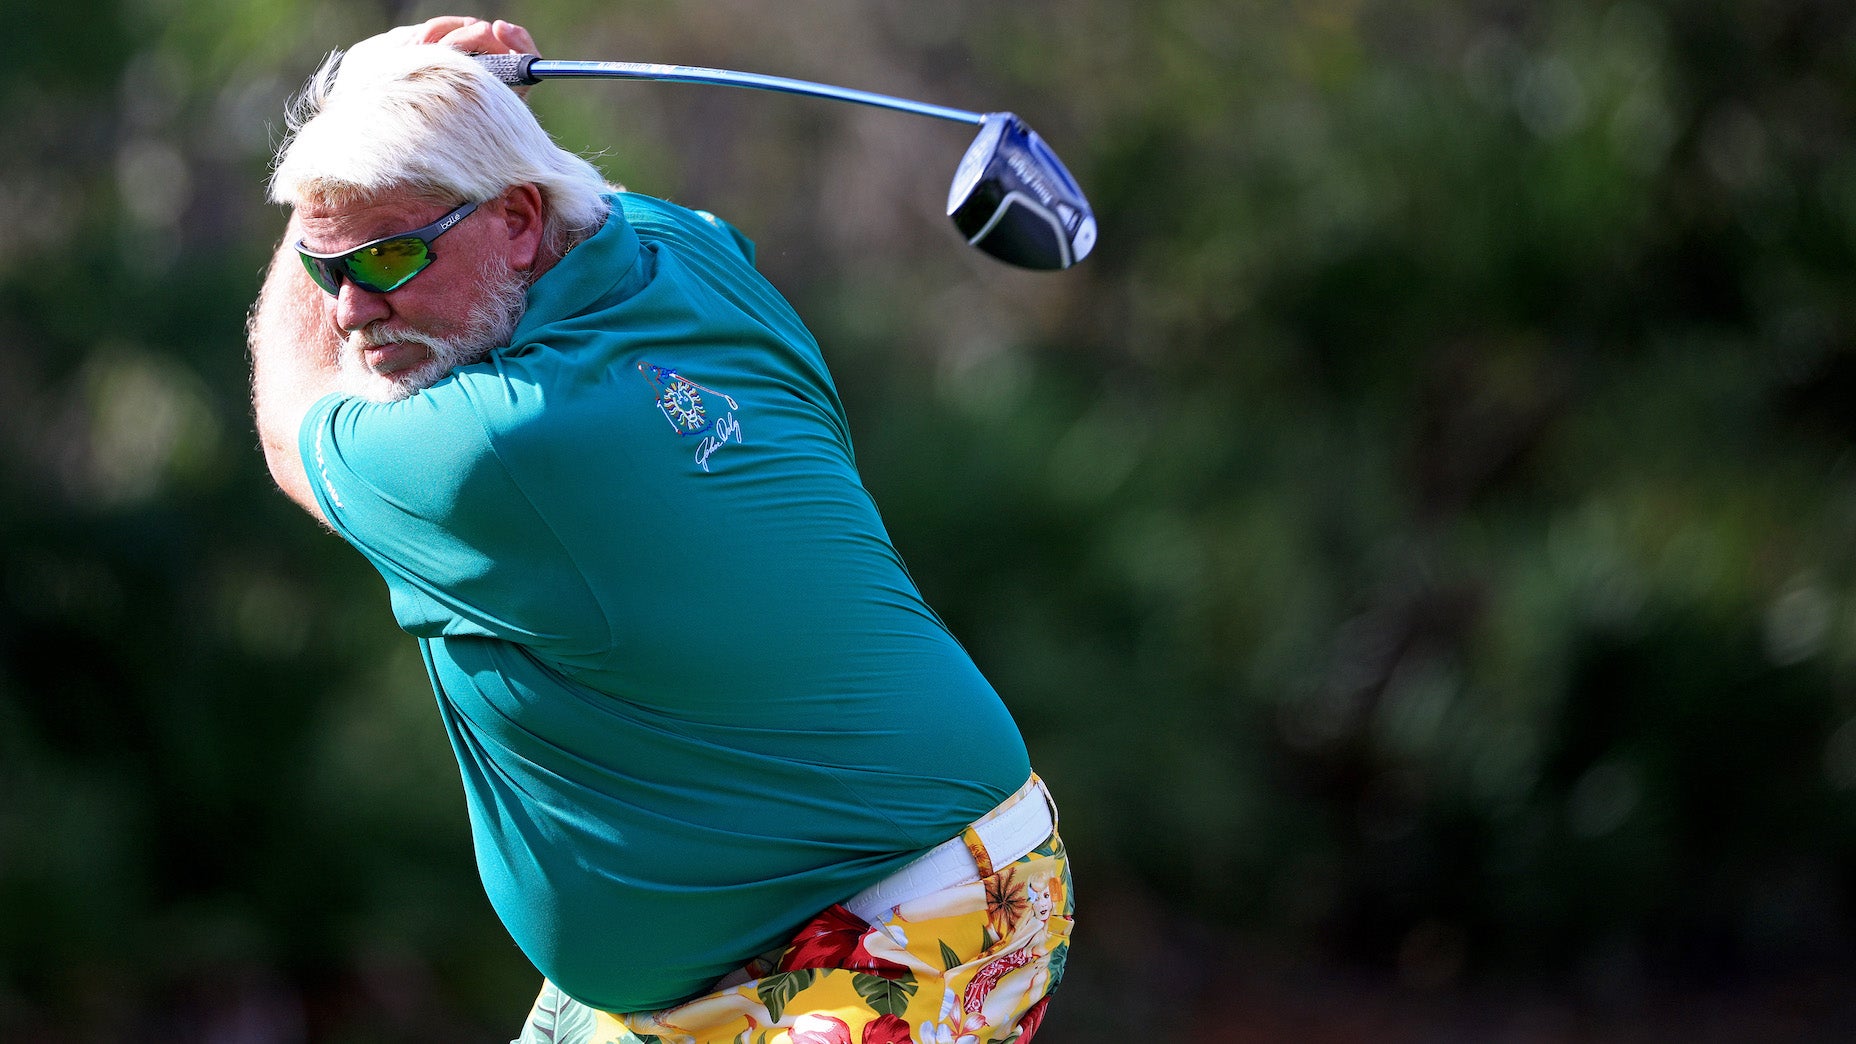 John Daly being John Daly and a Tiger Woods report